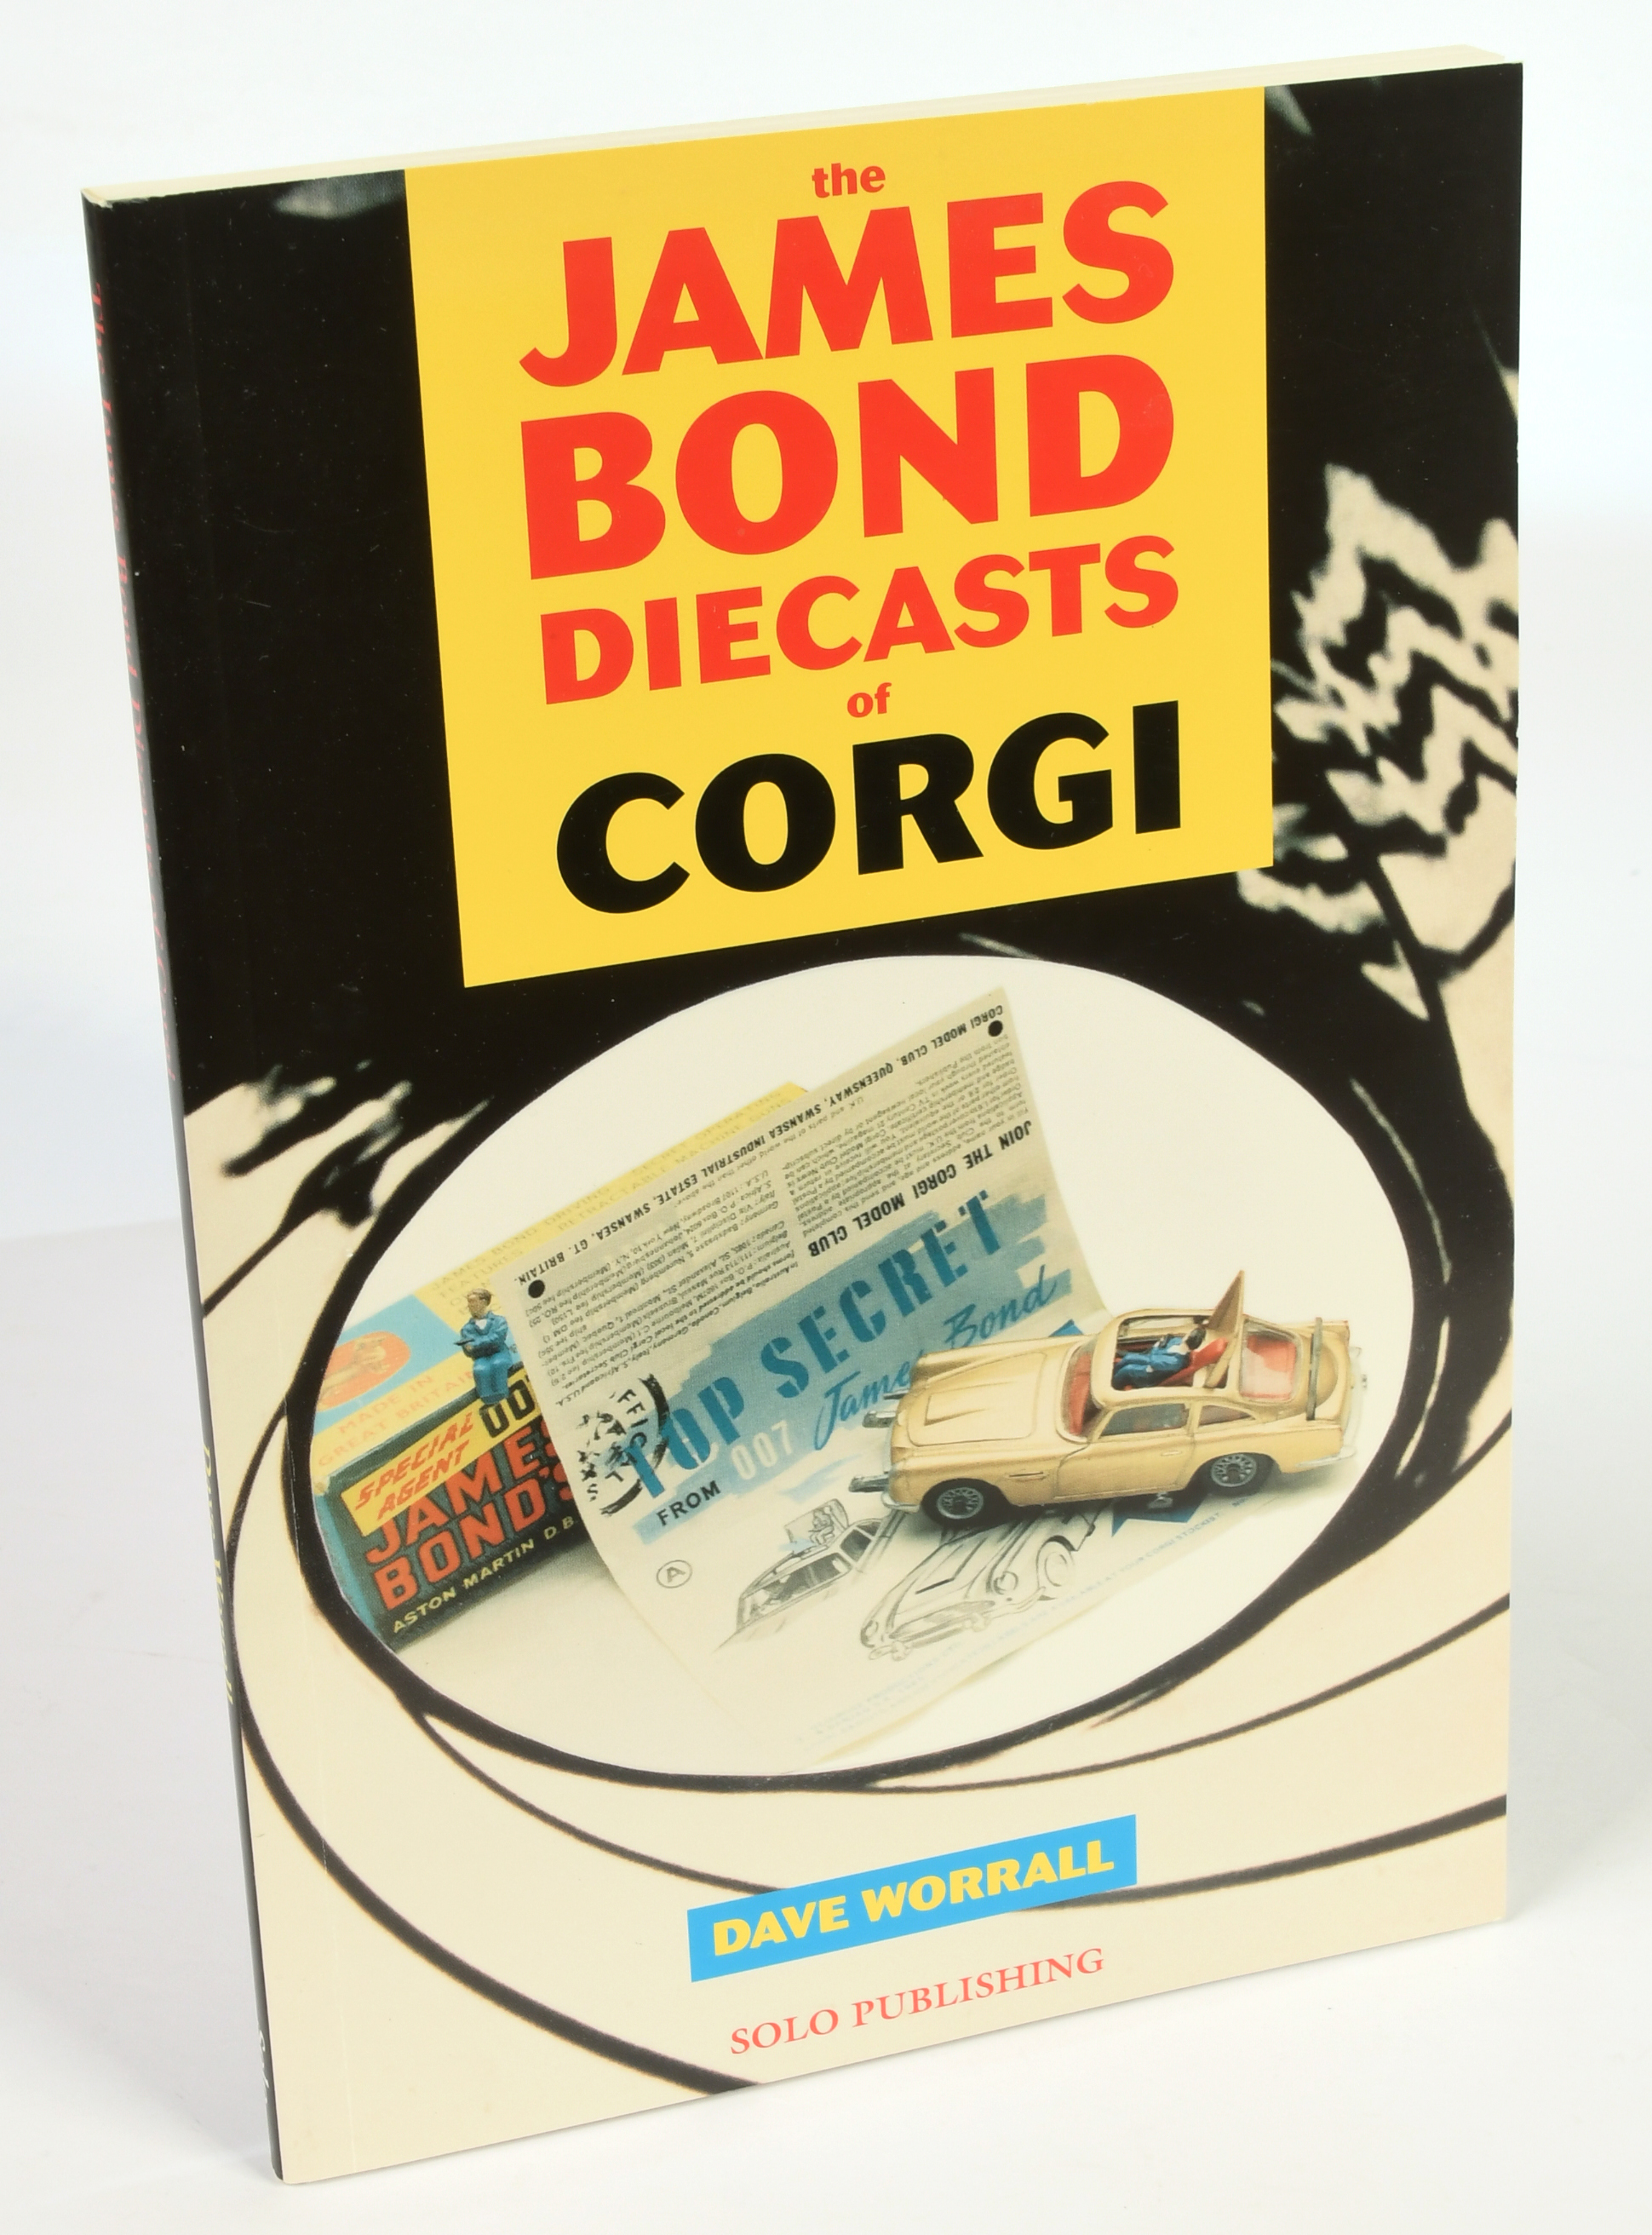 Corgi Toys "The James Bond Diecasts Of Corgi" Book - 1st issue Ltd this being 126/ 500 Signed by ...